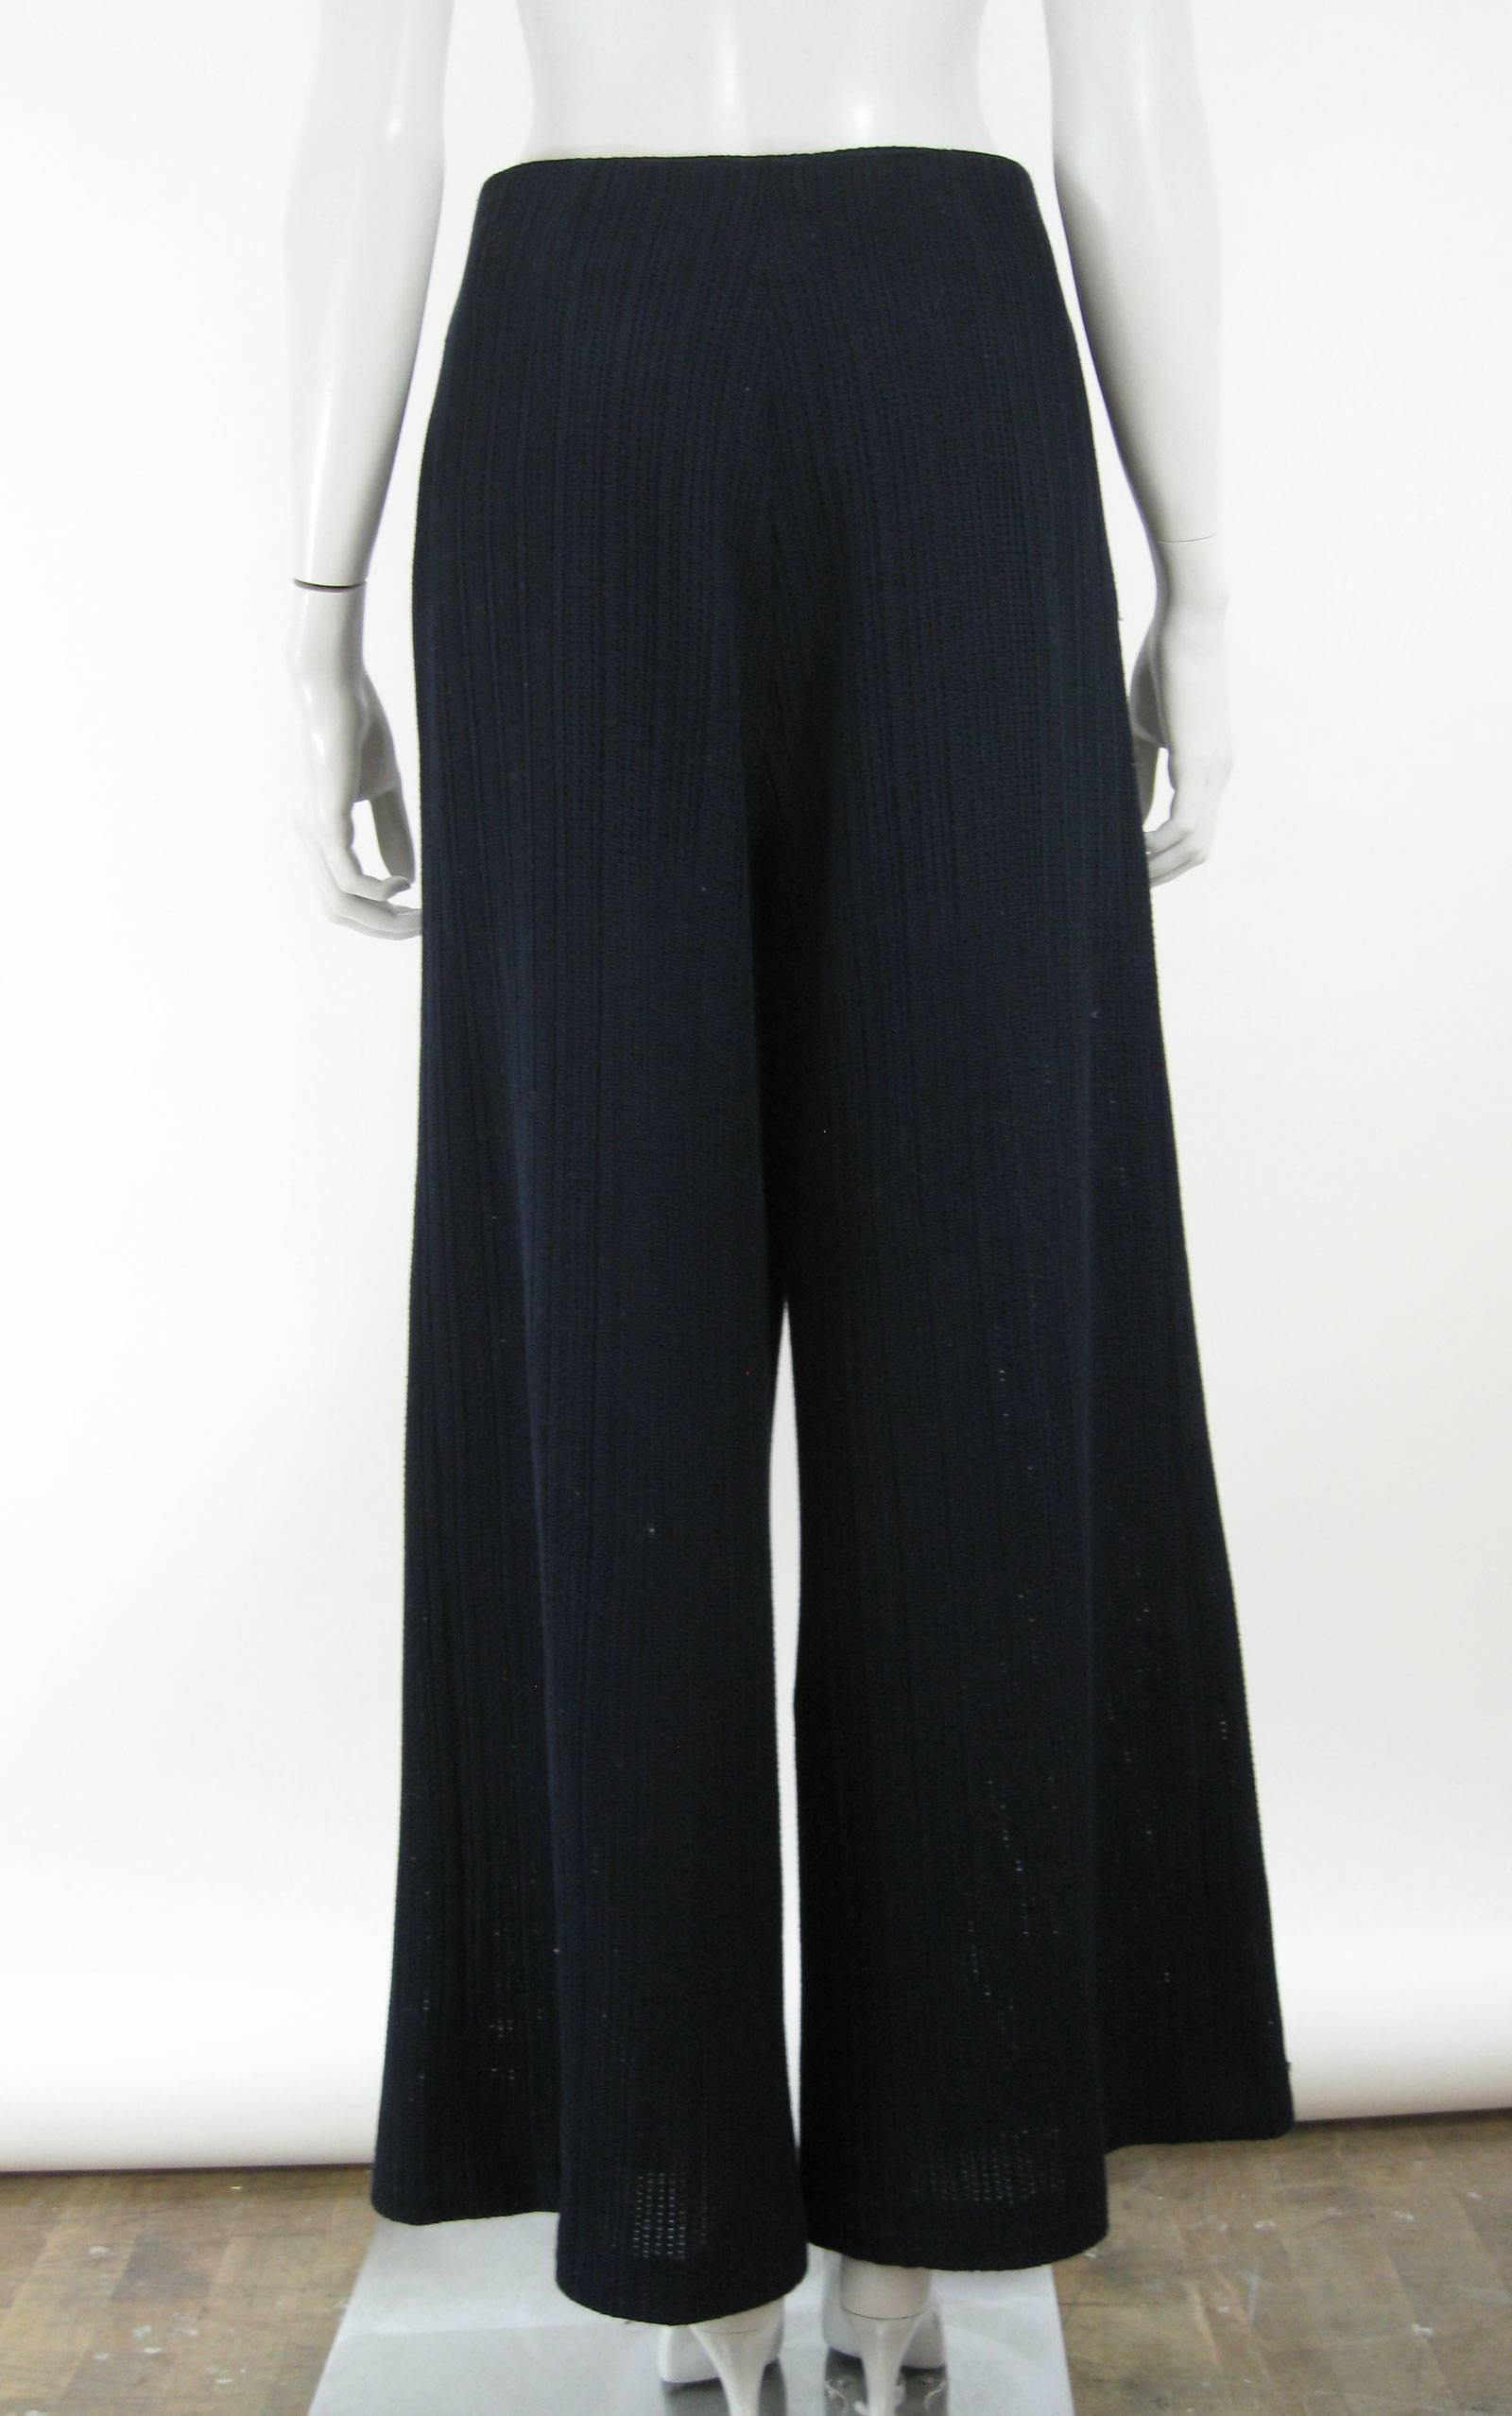 Chanel wide leg pants.
Dark navy blue.
Textured open weave knit fabric.
Inverted pleat detail front hip.
Side zipper.
Decorative Chanel button on hop.
Partially lined.
Side pockets.
Tagged a size 48. 

